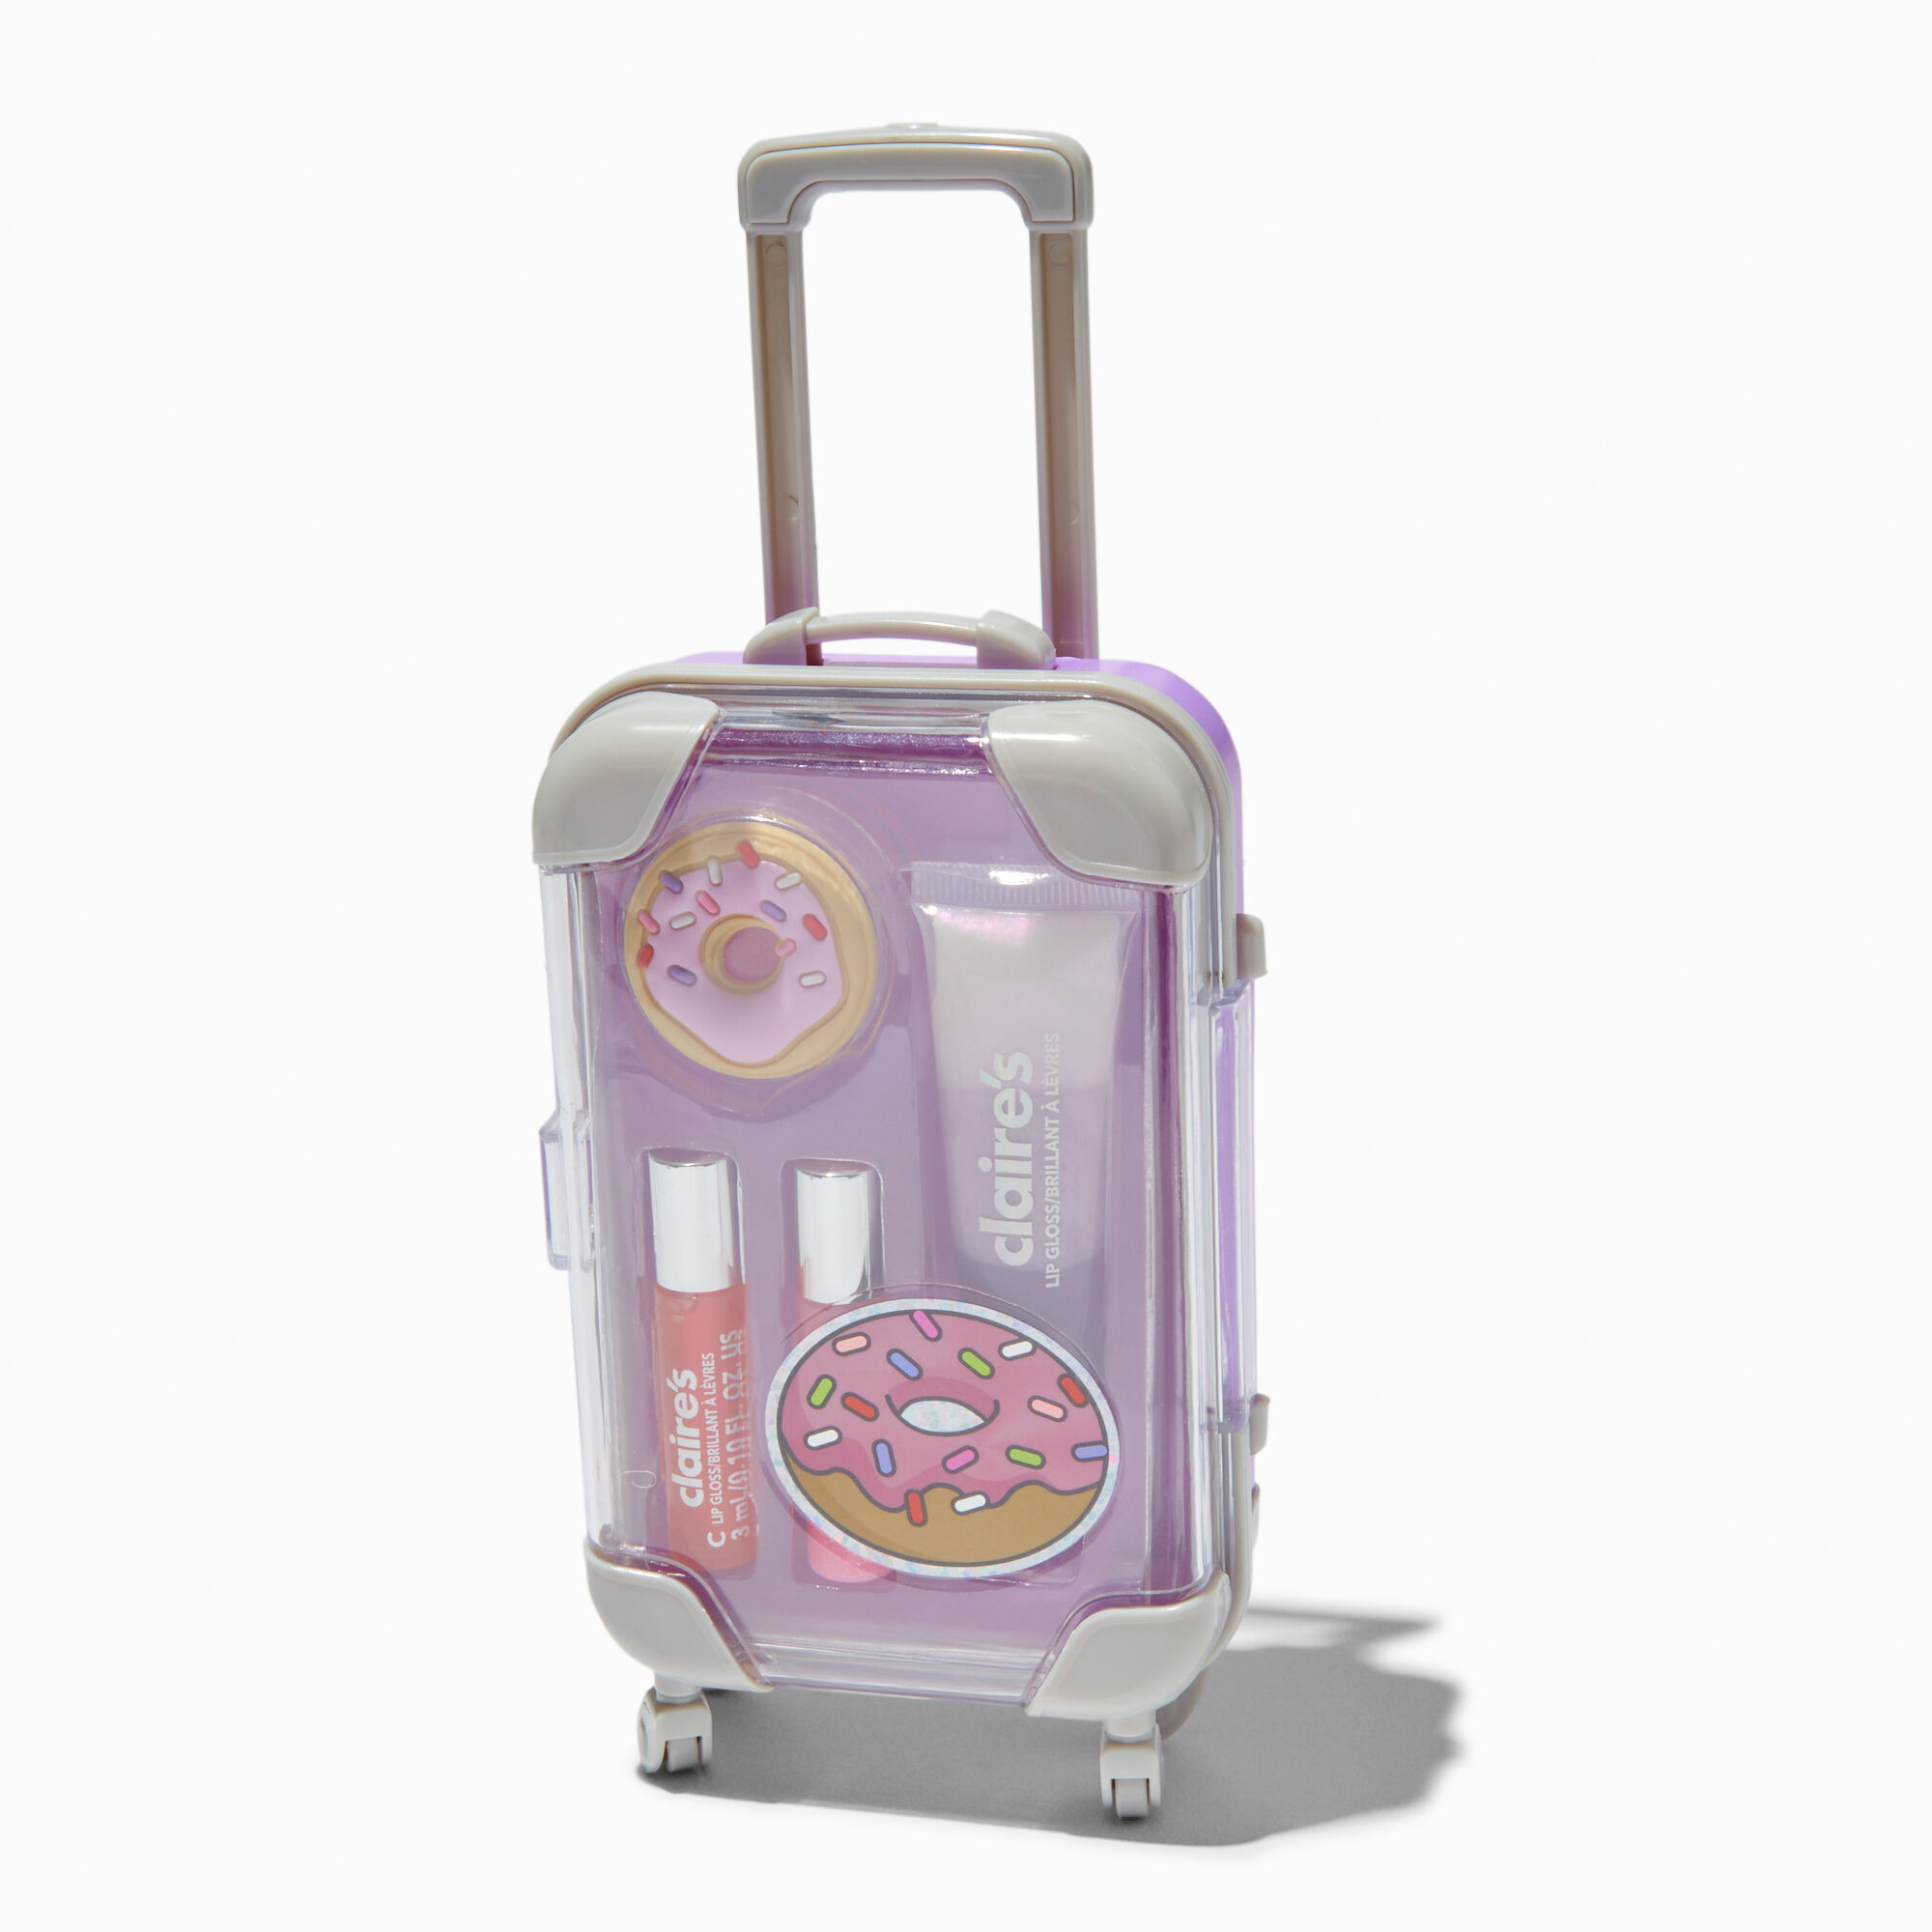 View Claires Donut Luggage Lip Gloss Set information